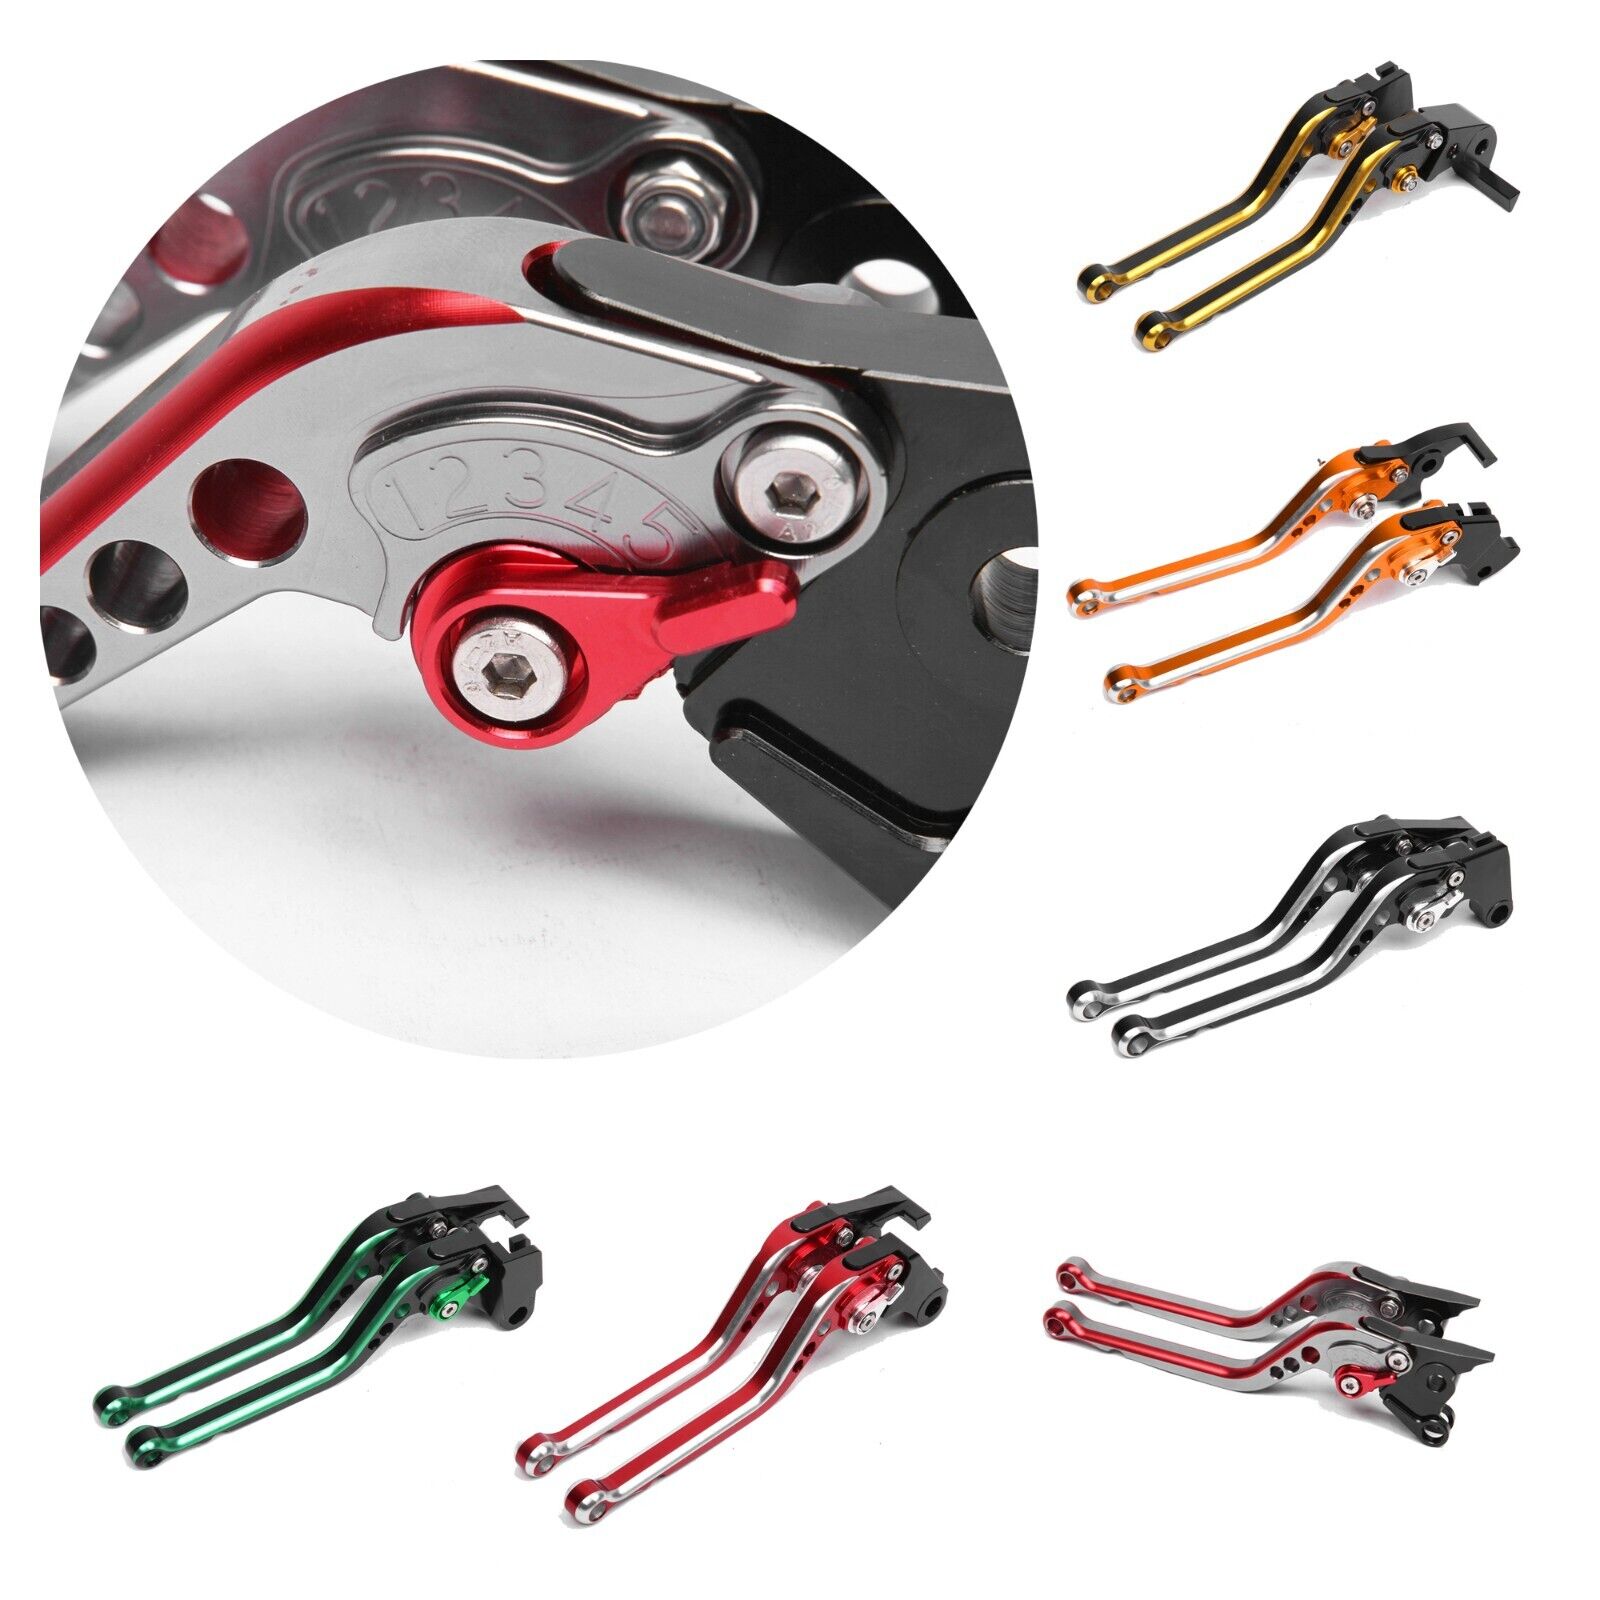 3 X Mix color clutch Brake Levers and 1X Folding Extend Brake Levers Clutch